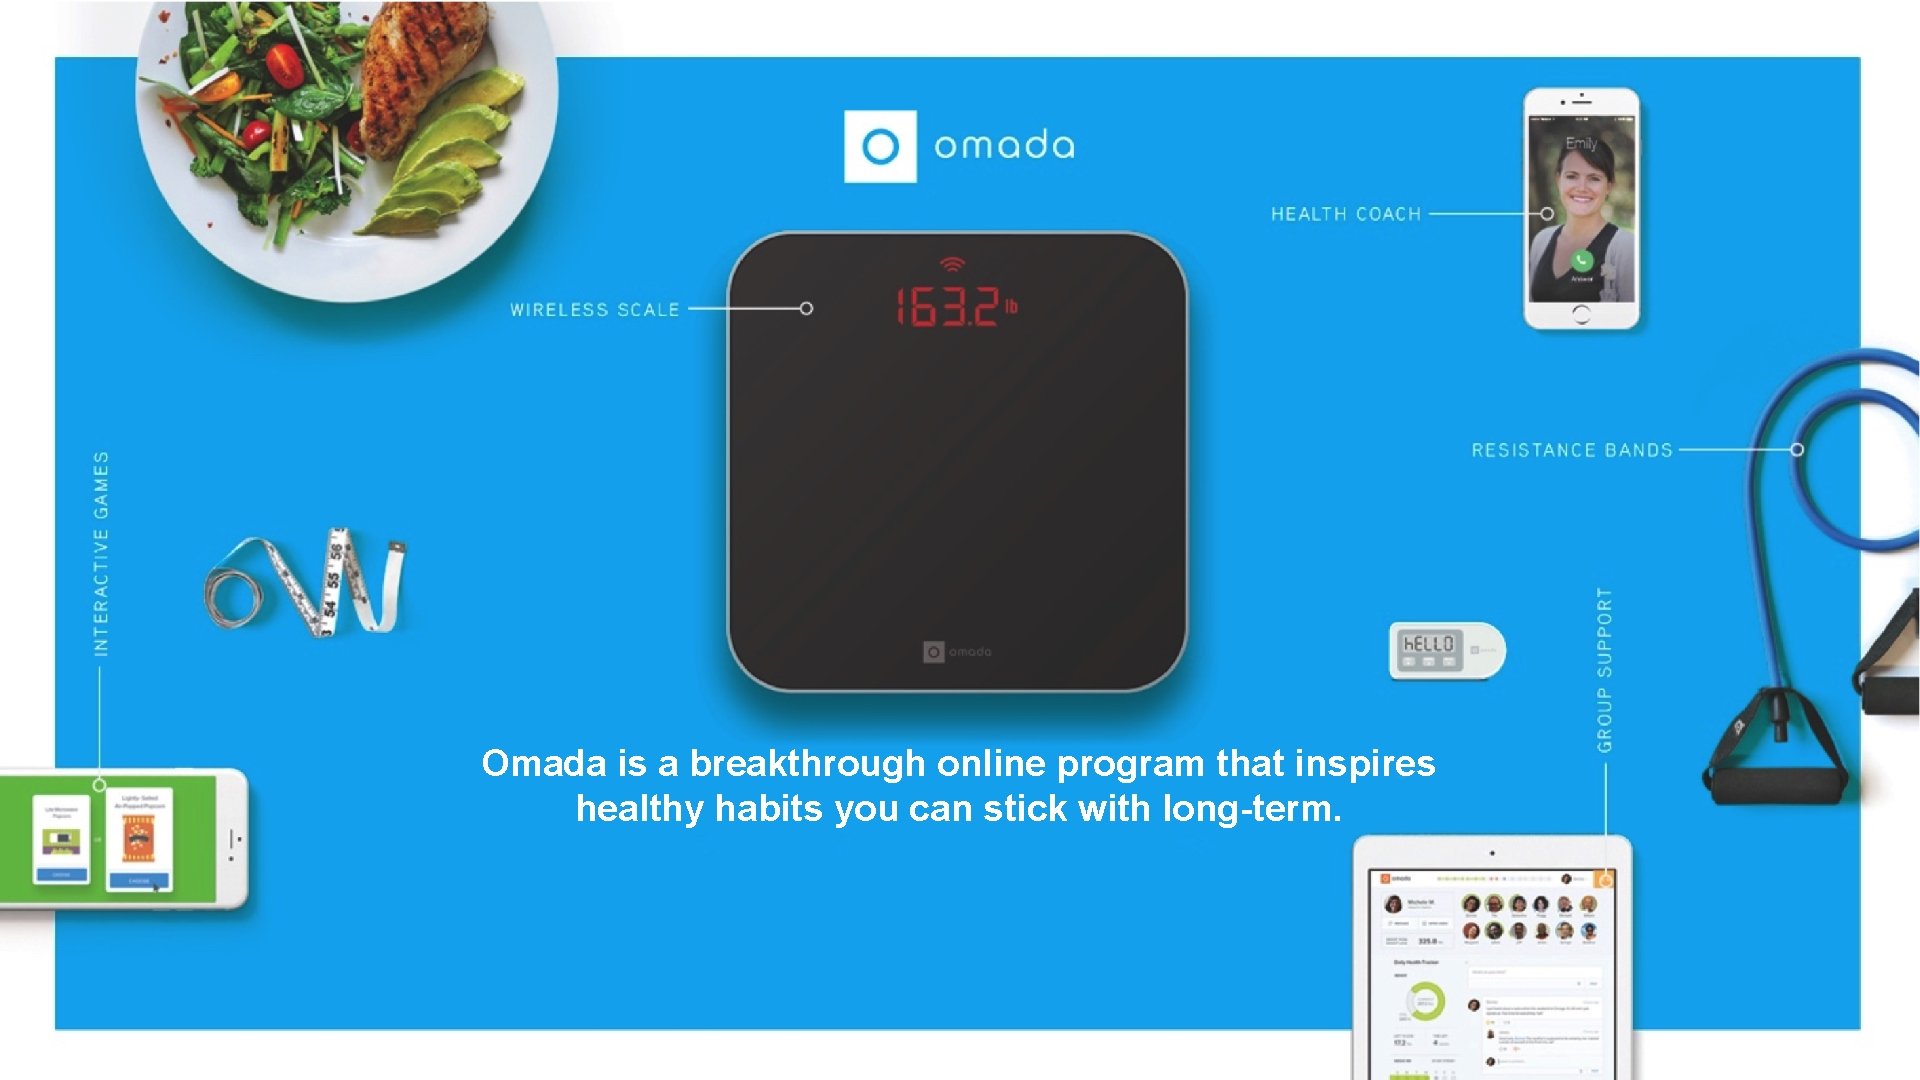 Omada is a breakthrough online program that inspires healthy habits you can stick with